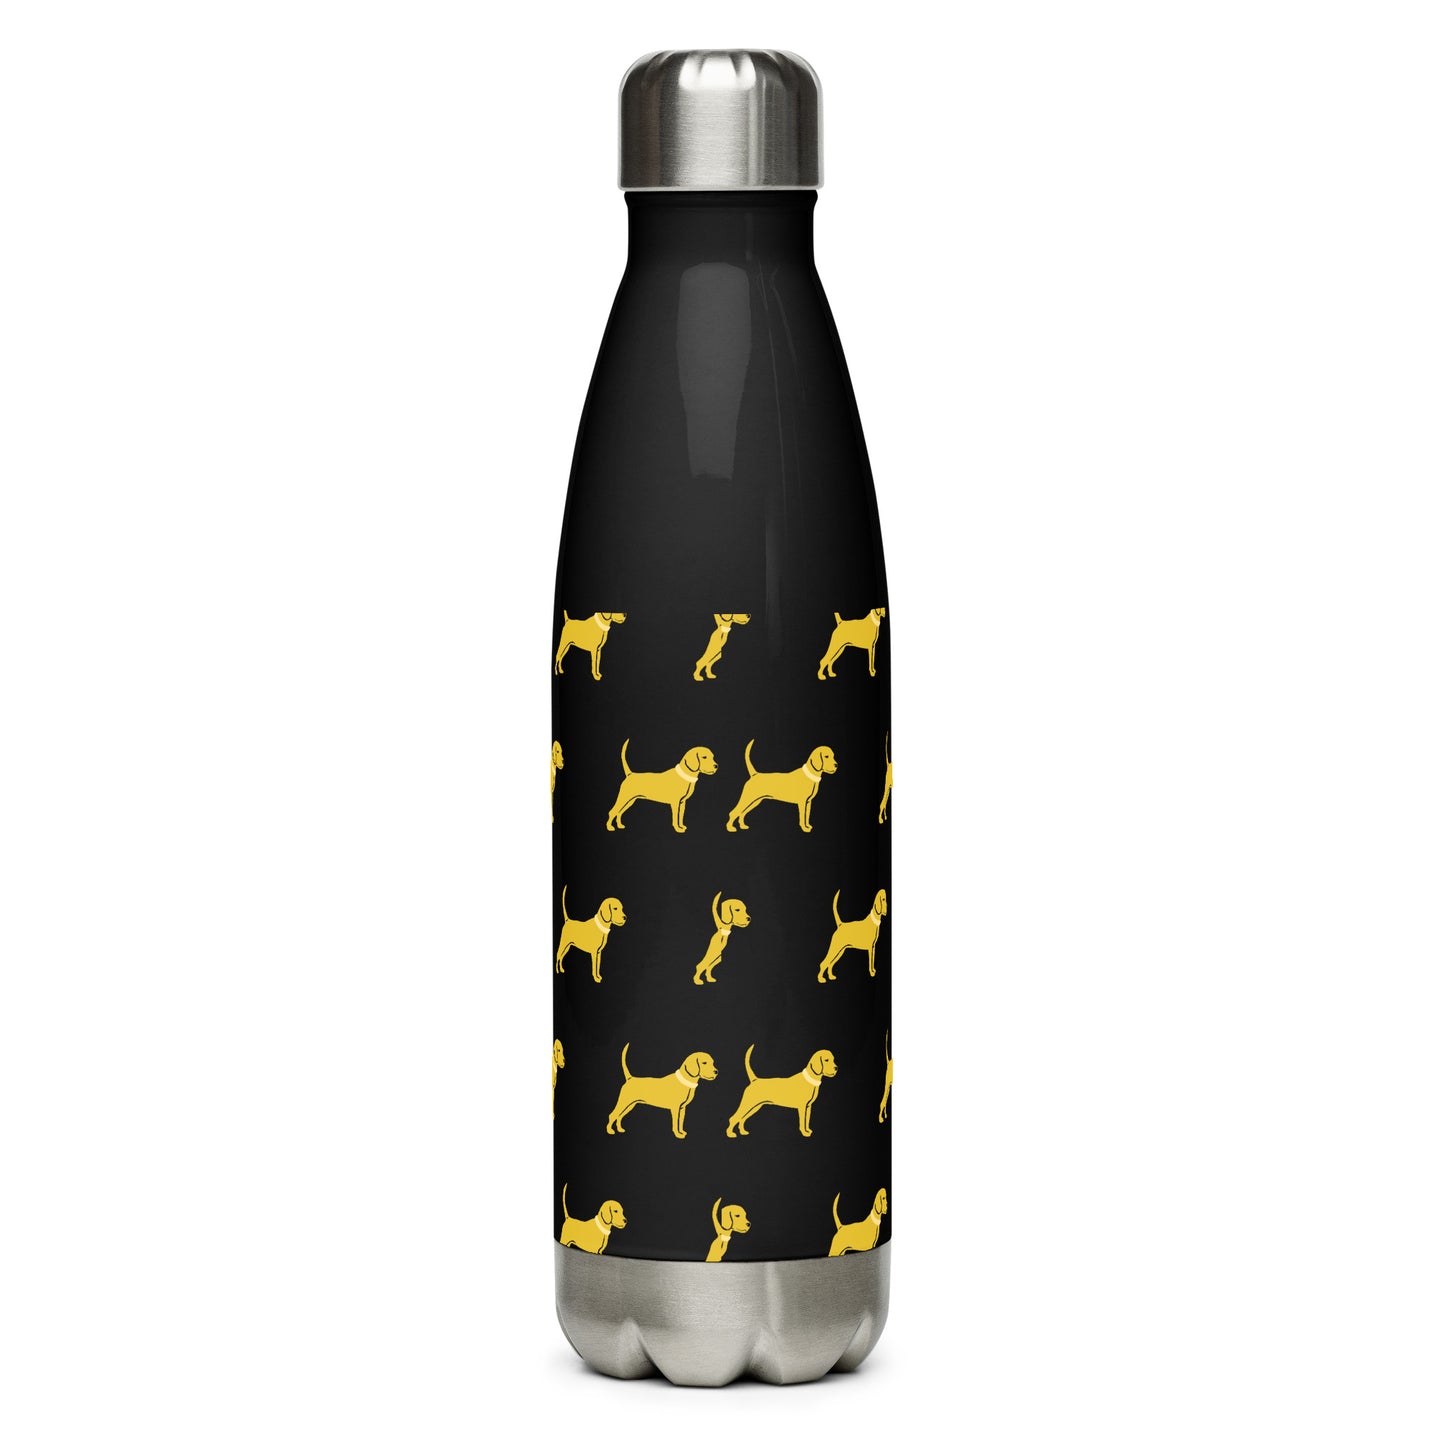 Stainless steel little yellow dog water bottle